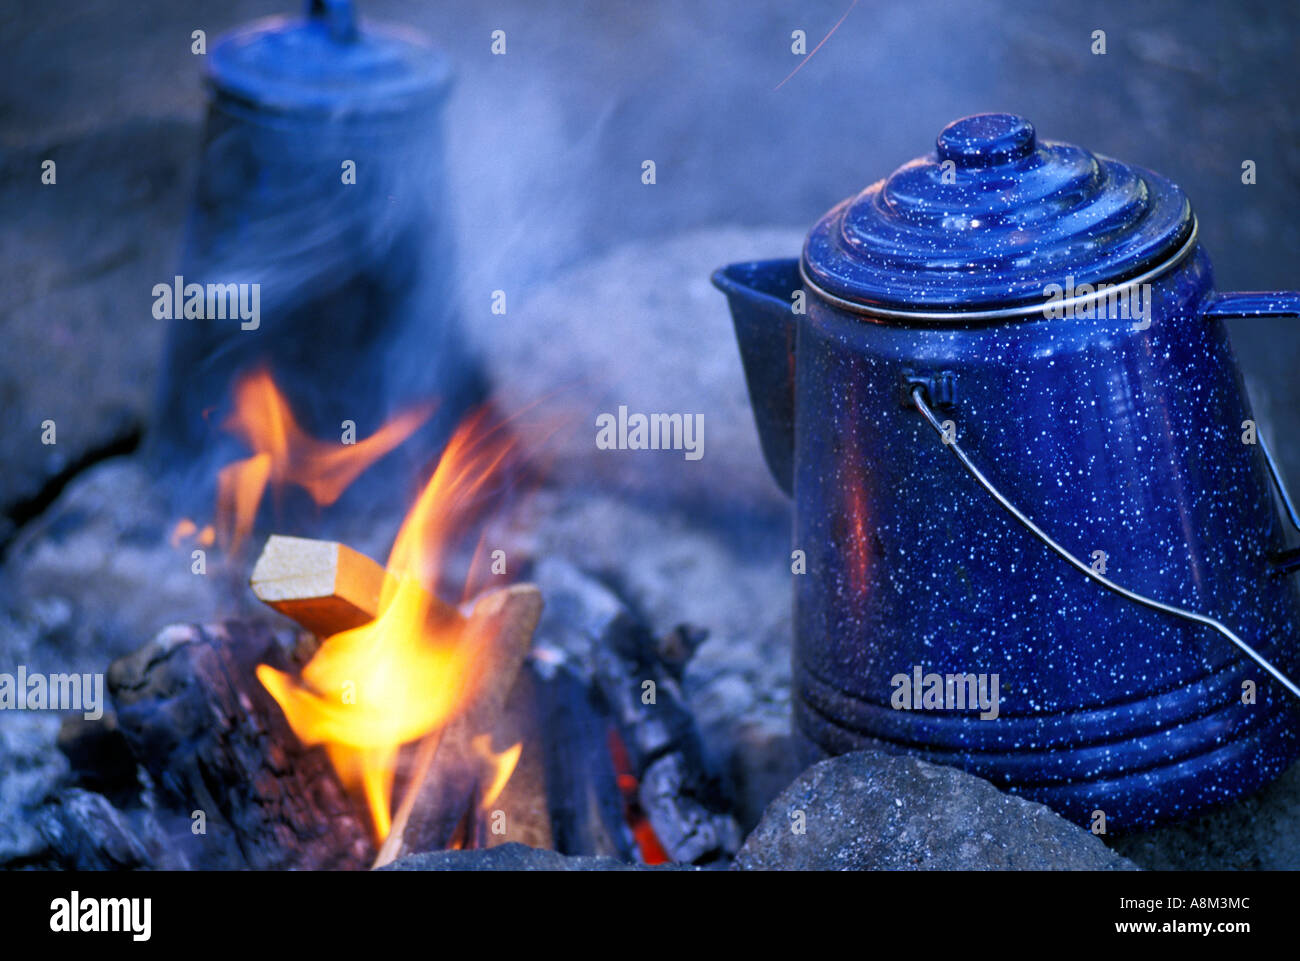 Coffee pots heating up on outdoor campfire, Middle fork of the Salmon River, Idaho, USA Stock Photo